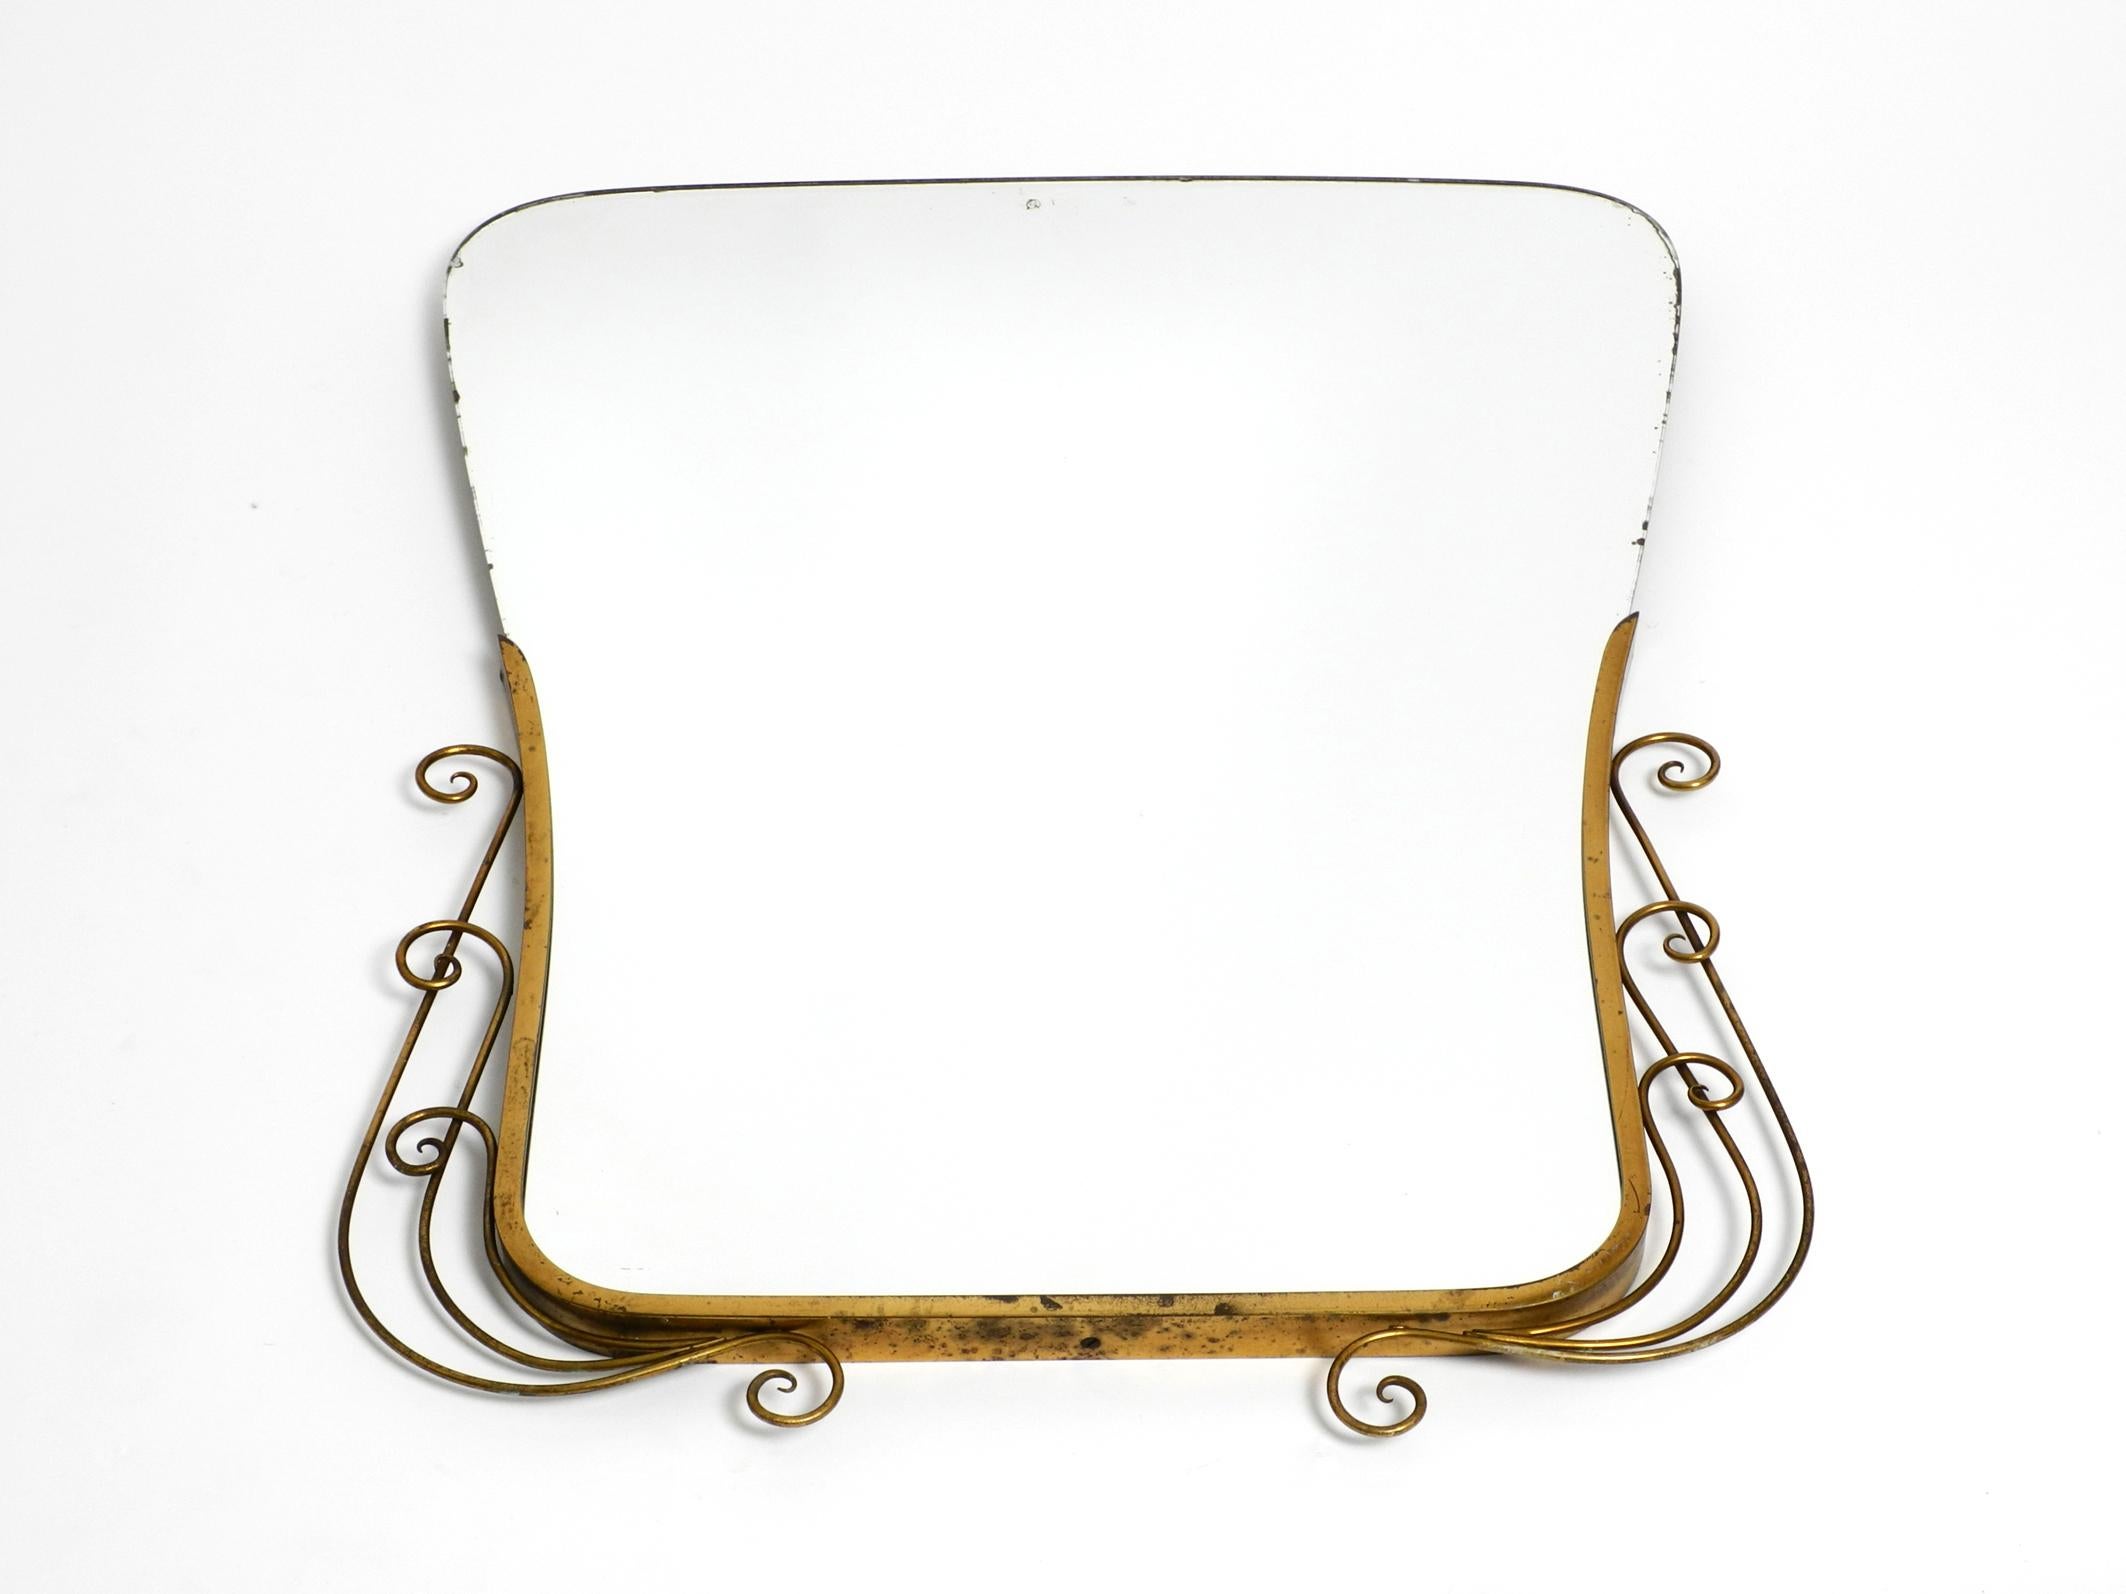 Exceptionally beautiful Italian mid century wall mirror.
Great elaborate design with ornate brass frame in diabolo shape.
Very good vintage condition without damage with a wonderful patina on the brass.
No damage to the entire mirror. Glass